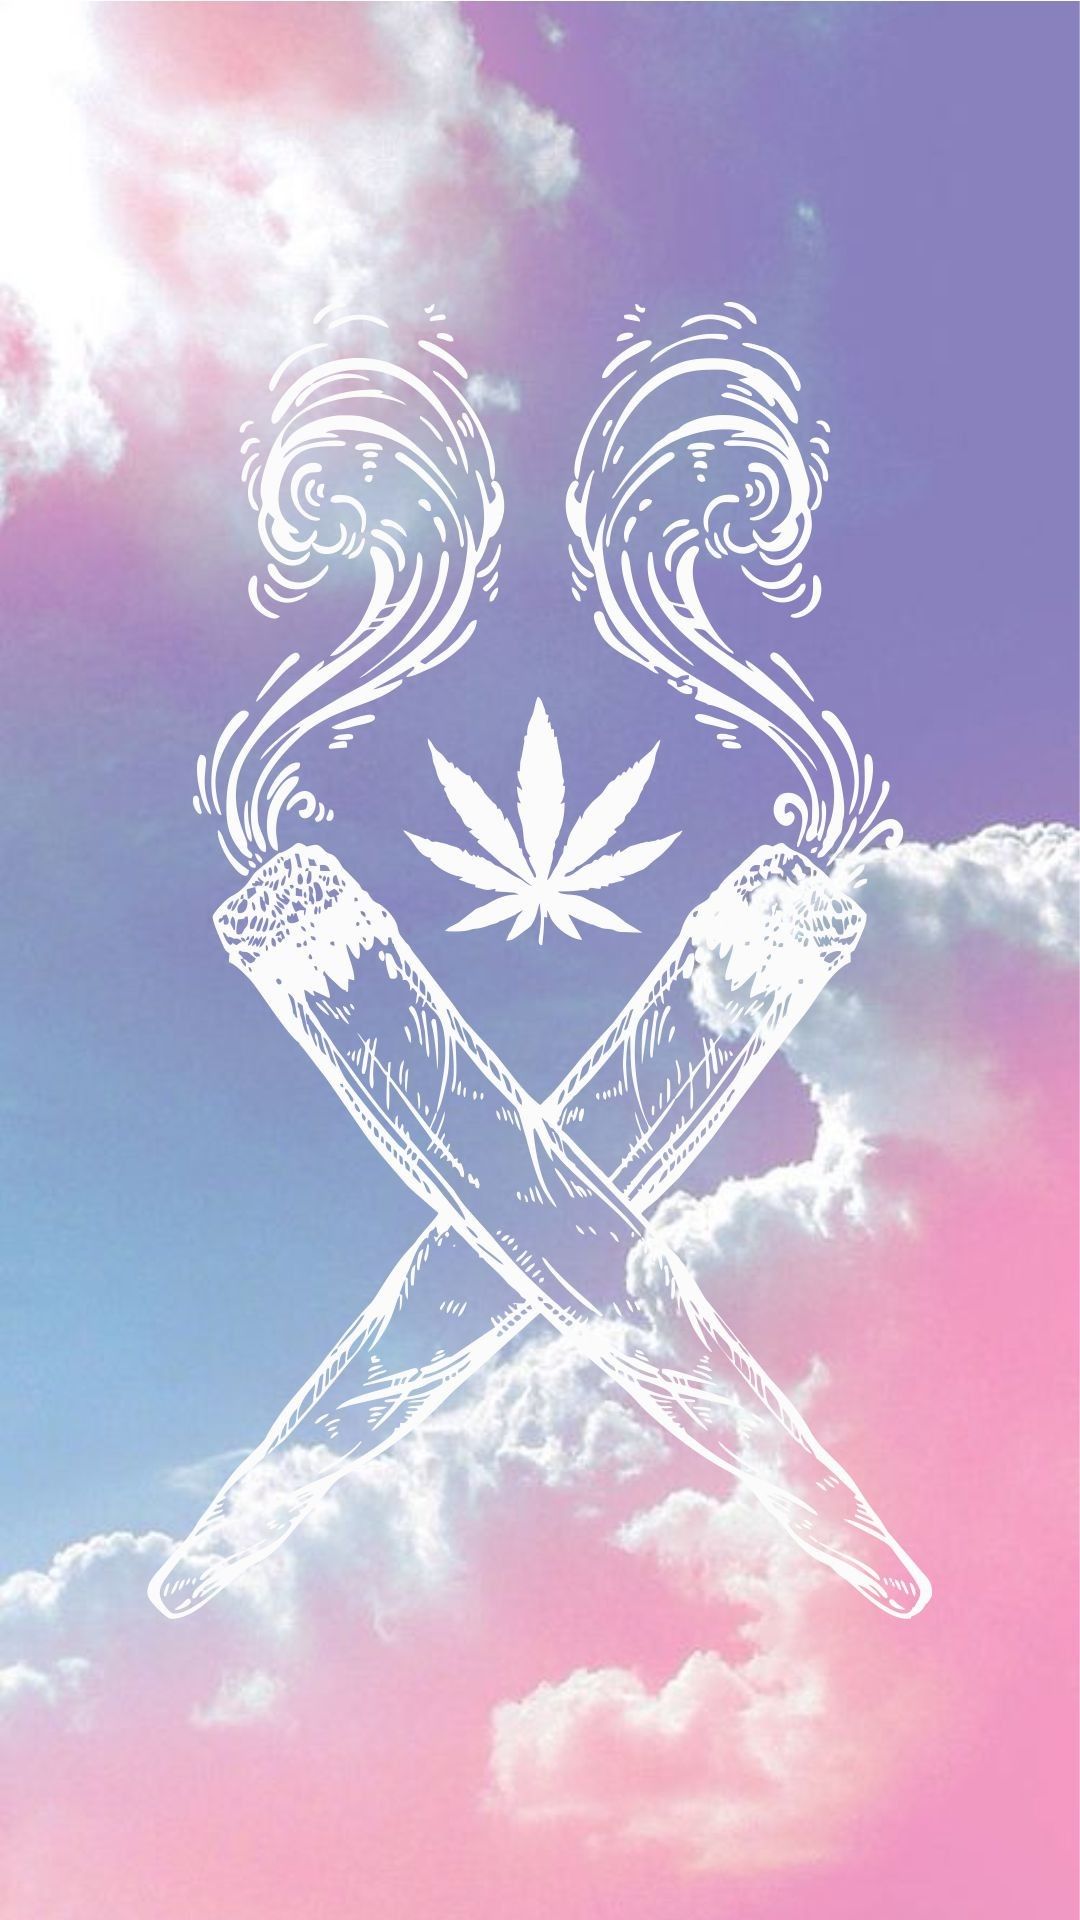 Trippy Wallpaper Weed